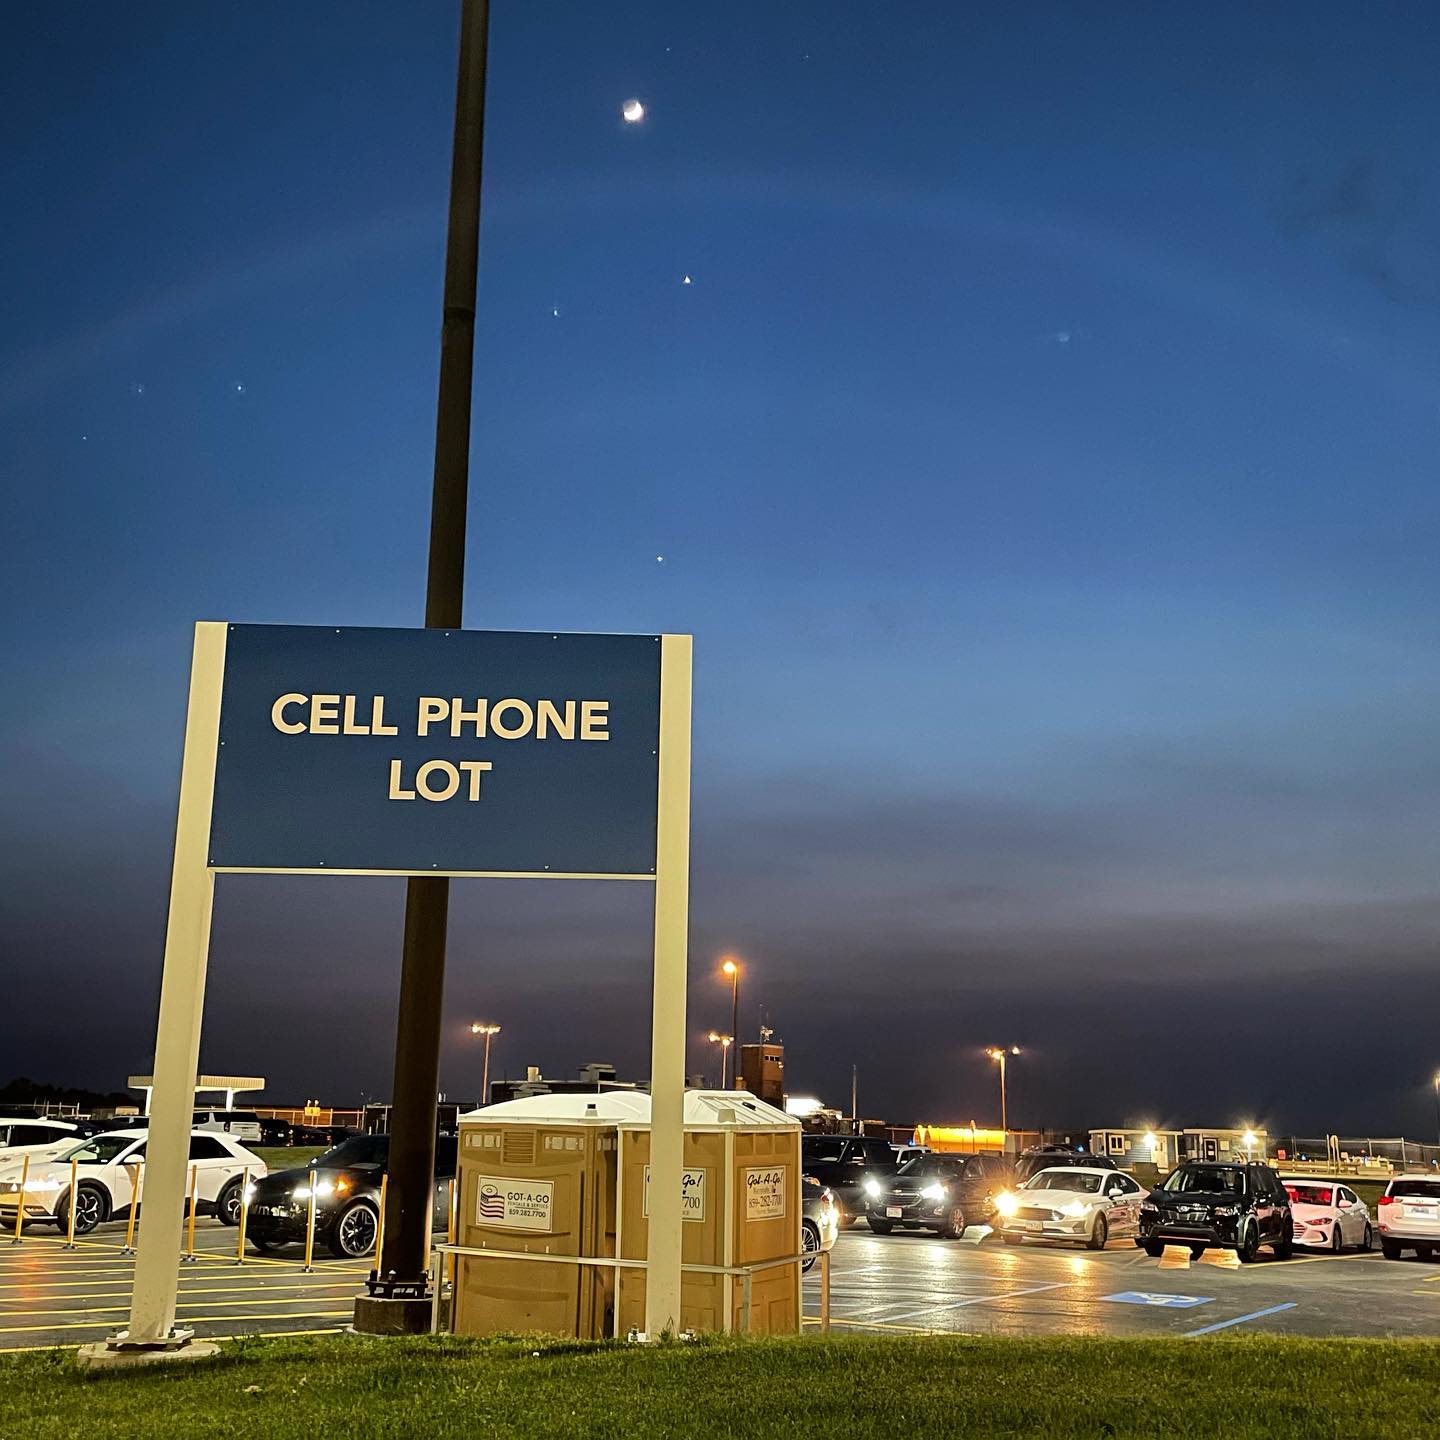 Airport cell phone lots: another way mobile computing has transformed our lives in unexpected ways. @cvgairport